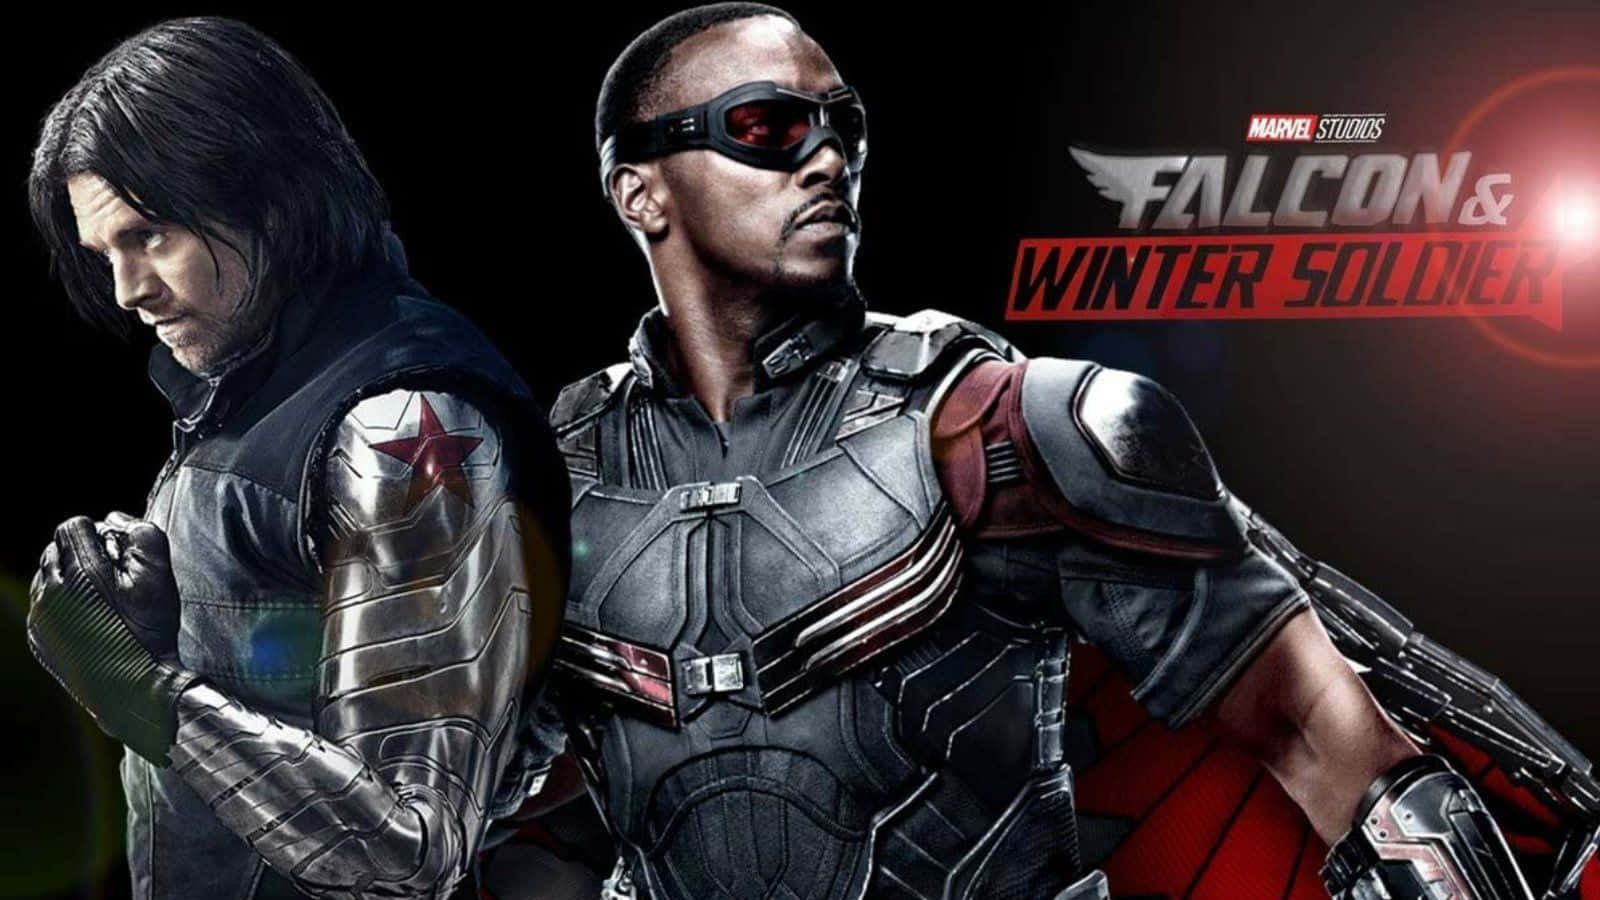 The Falcon And The Winter Soldier Character Poster Wallpaper